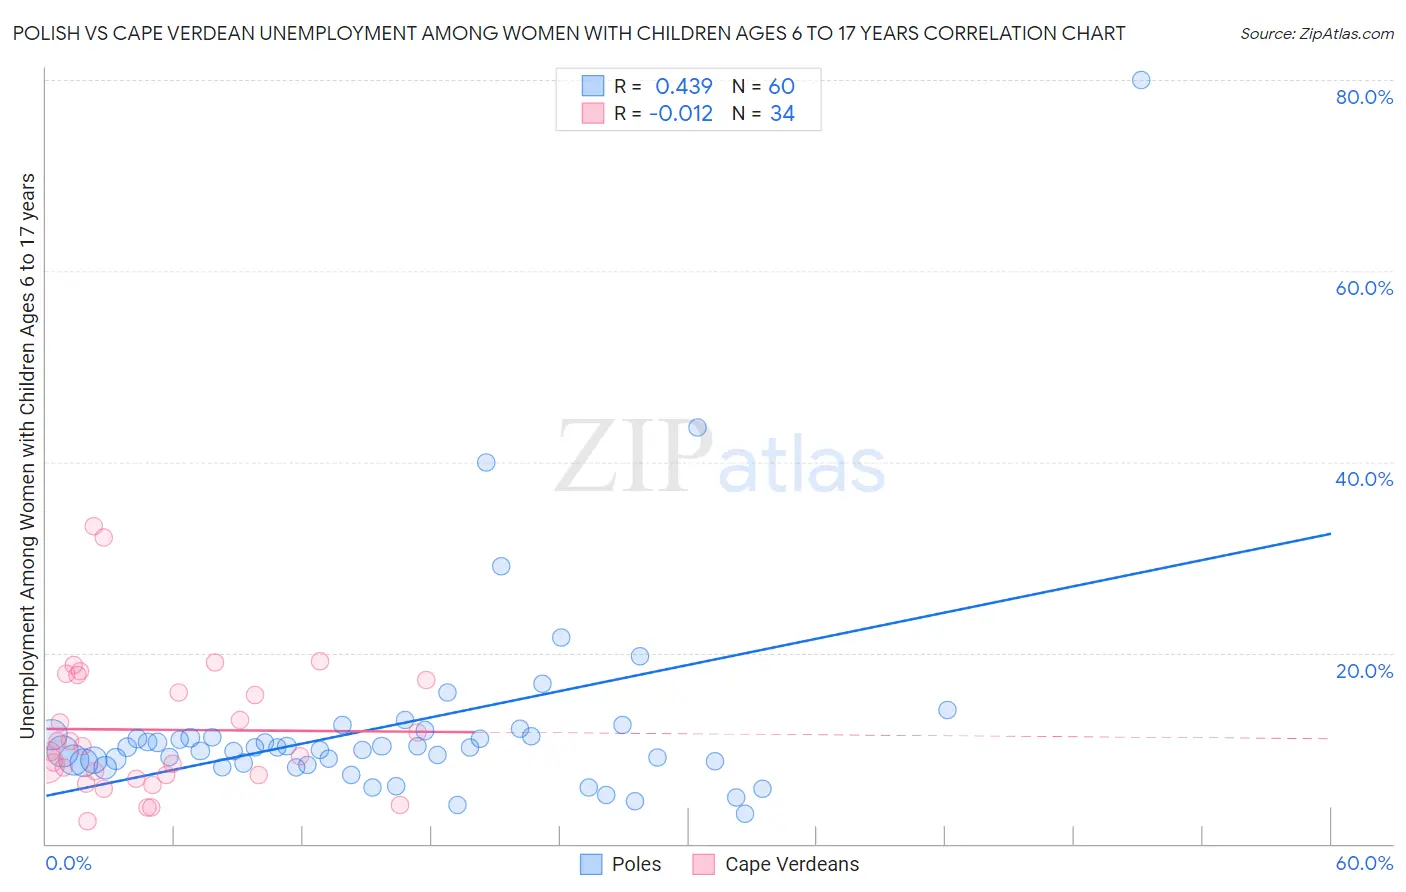 Polish vs Cape Verdean Unemployment Among Women with Children Ages 6 to 17 years